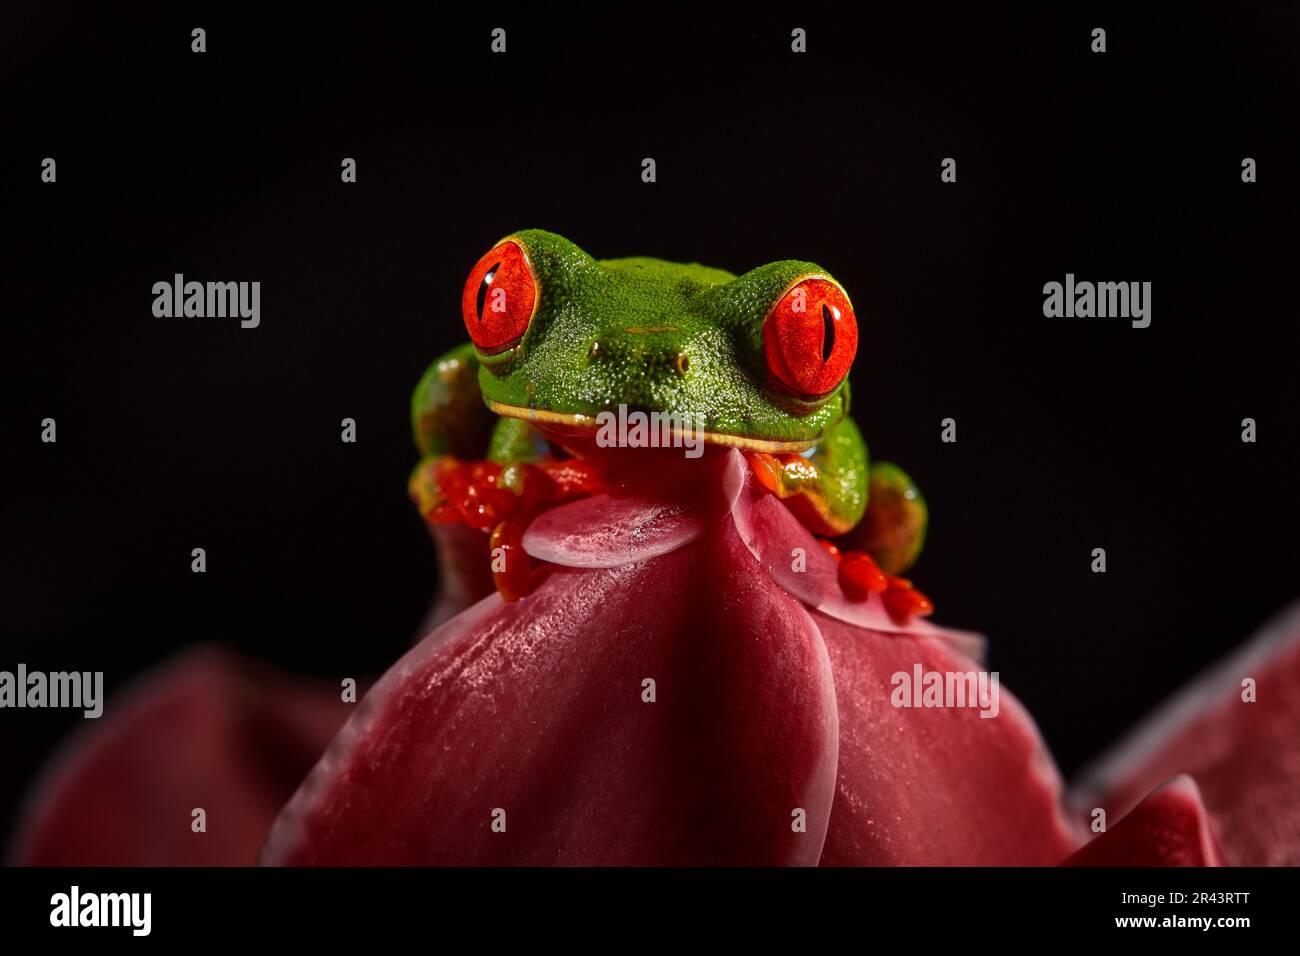 Wildlife tropic. Red-eyed Tree Frog, Agalychnis callidryas, animal with big red eyes, in the nature habitat. Beautiful amphibian in the night forest, Stock Photo